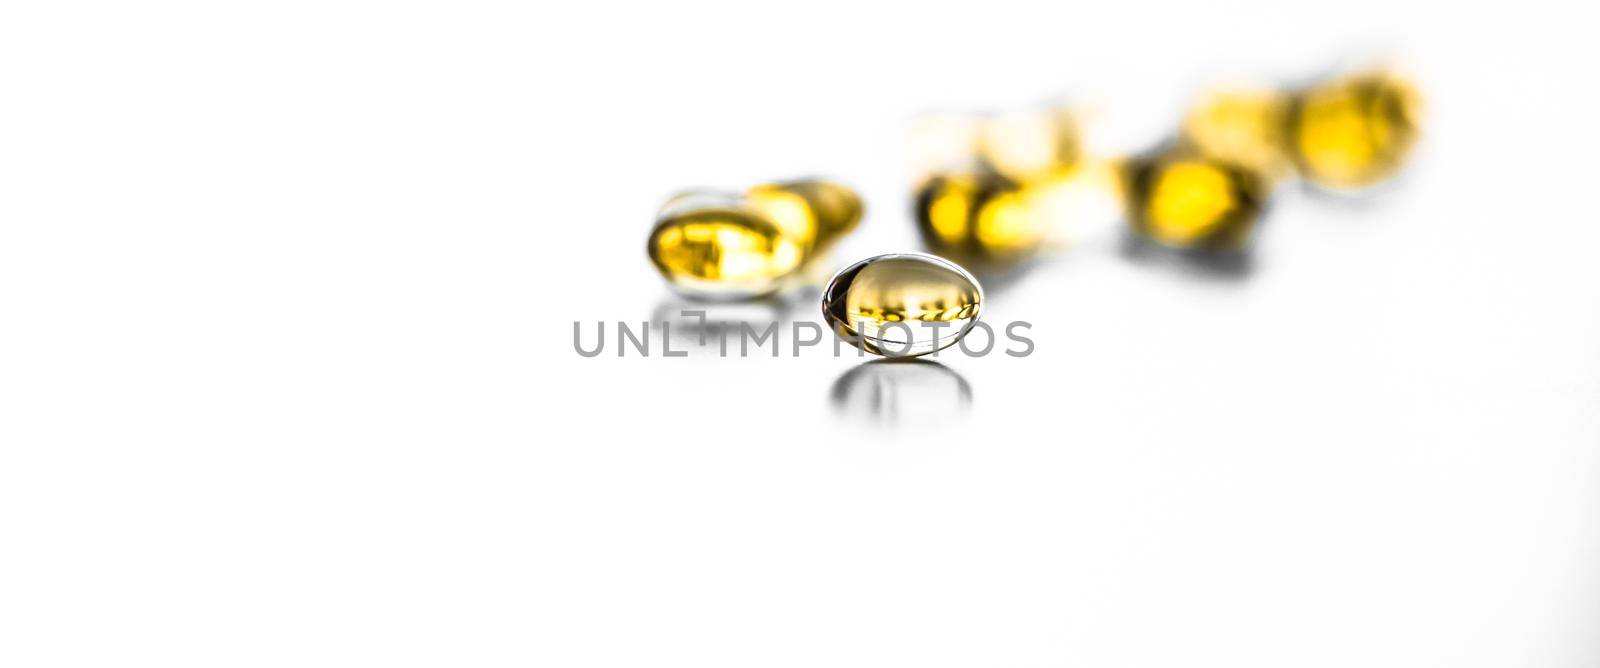 Pharmaceutical, branding and science concept - Vitamin D and golden Omega 3 pills for healthy diet nutrition, fish oil food supplement pill capsules, healthcare and medicine as pharmacy background